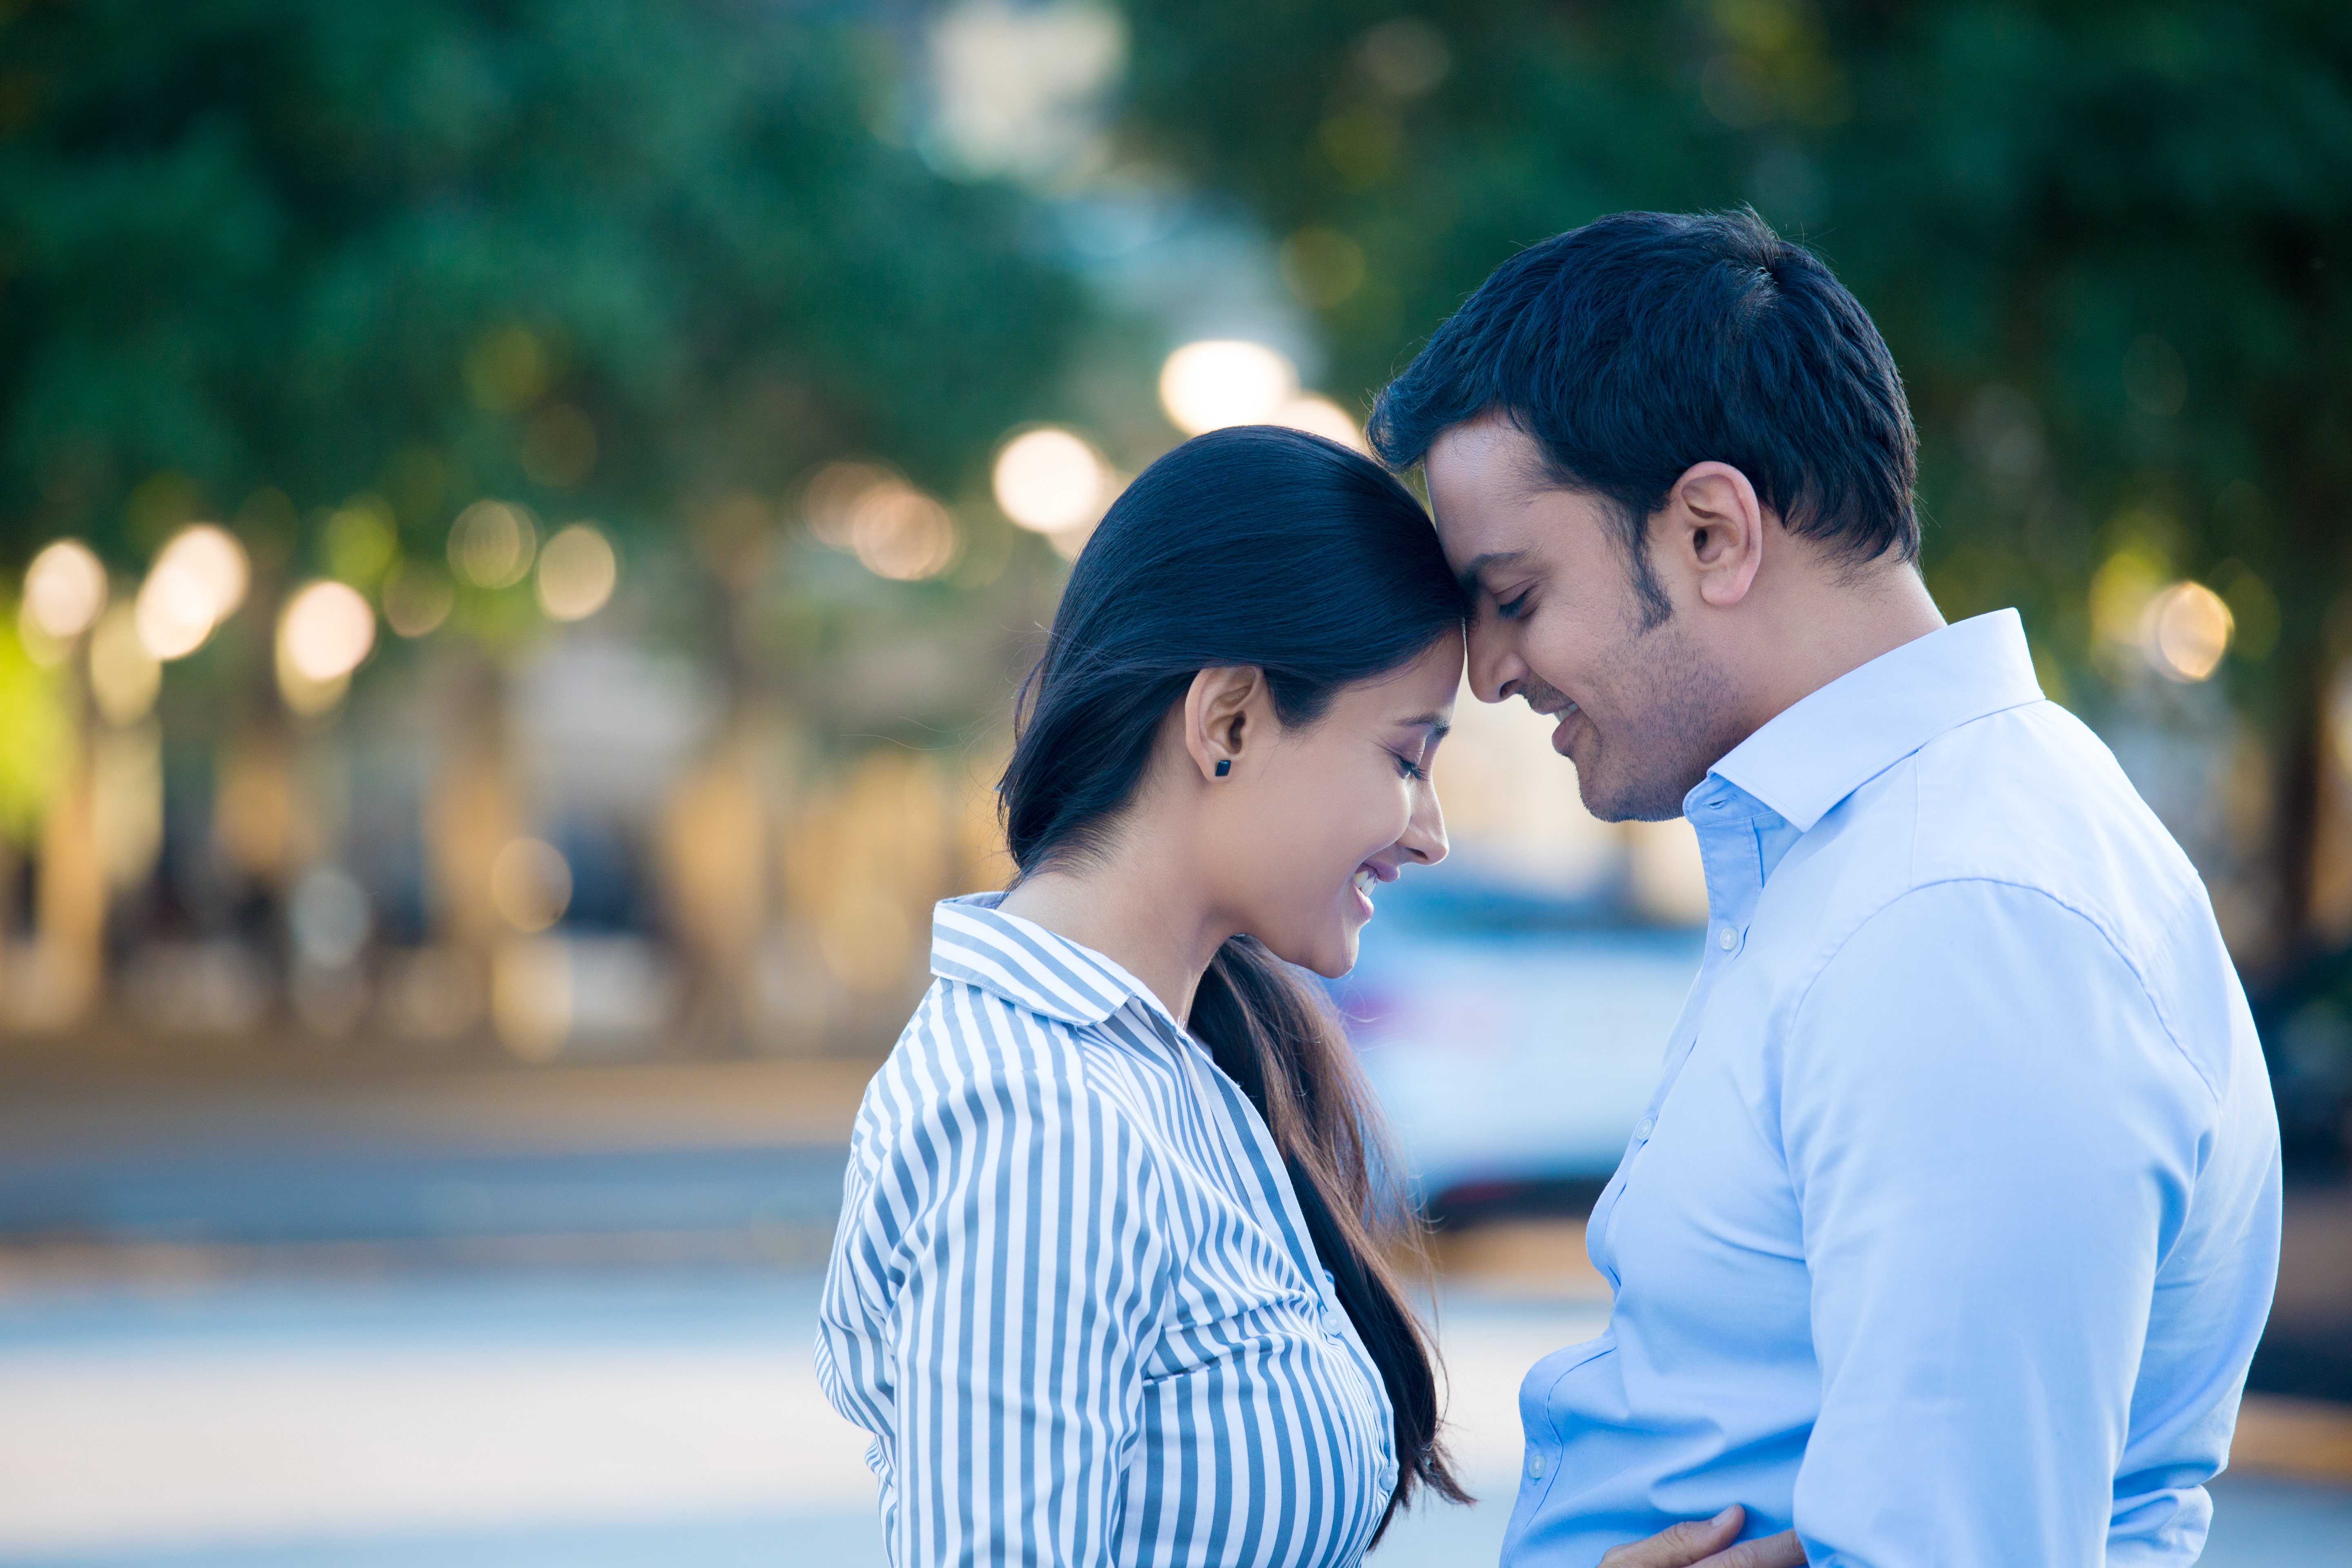 south asian dating blog